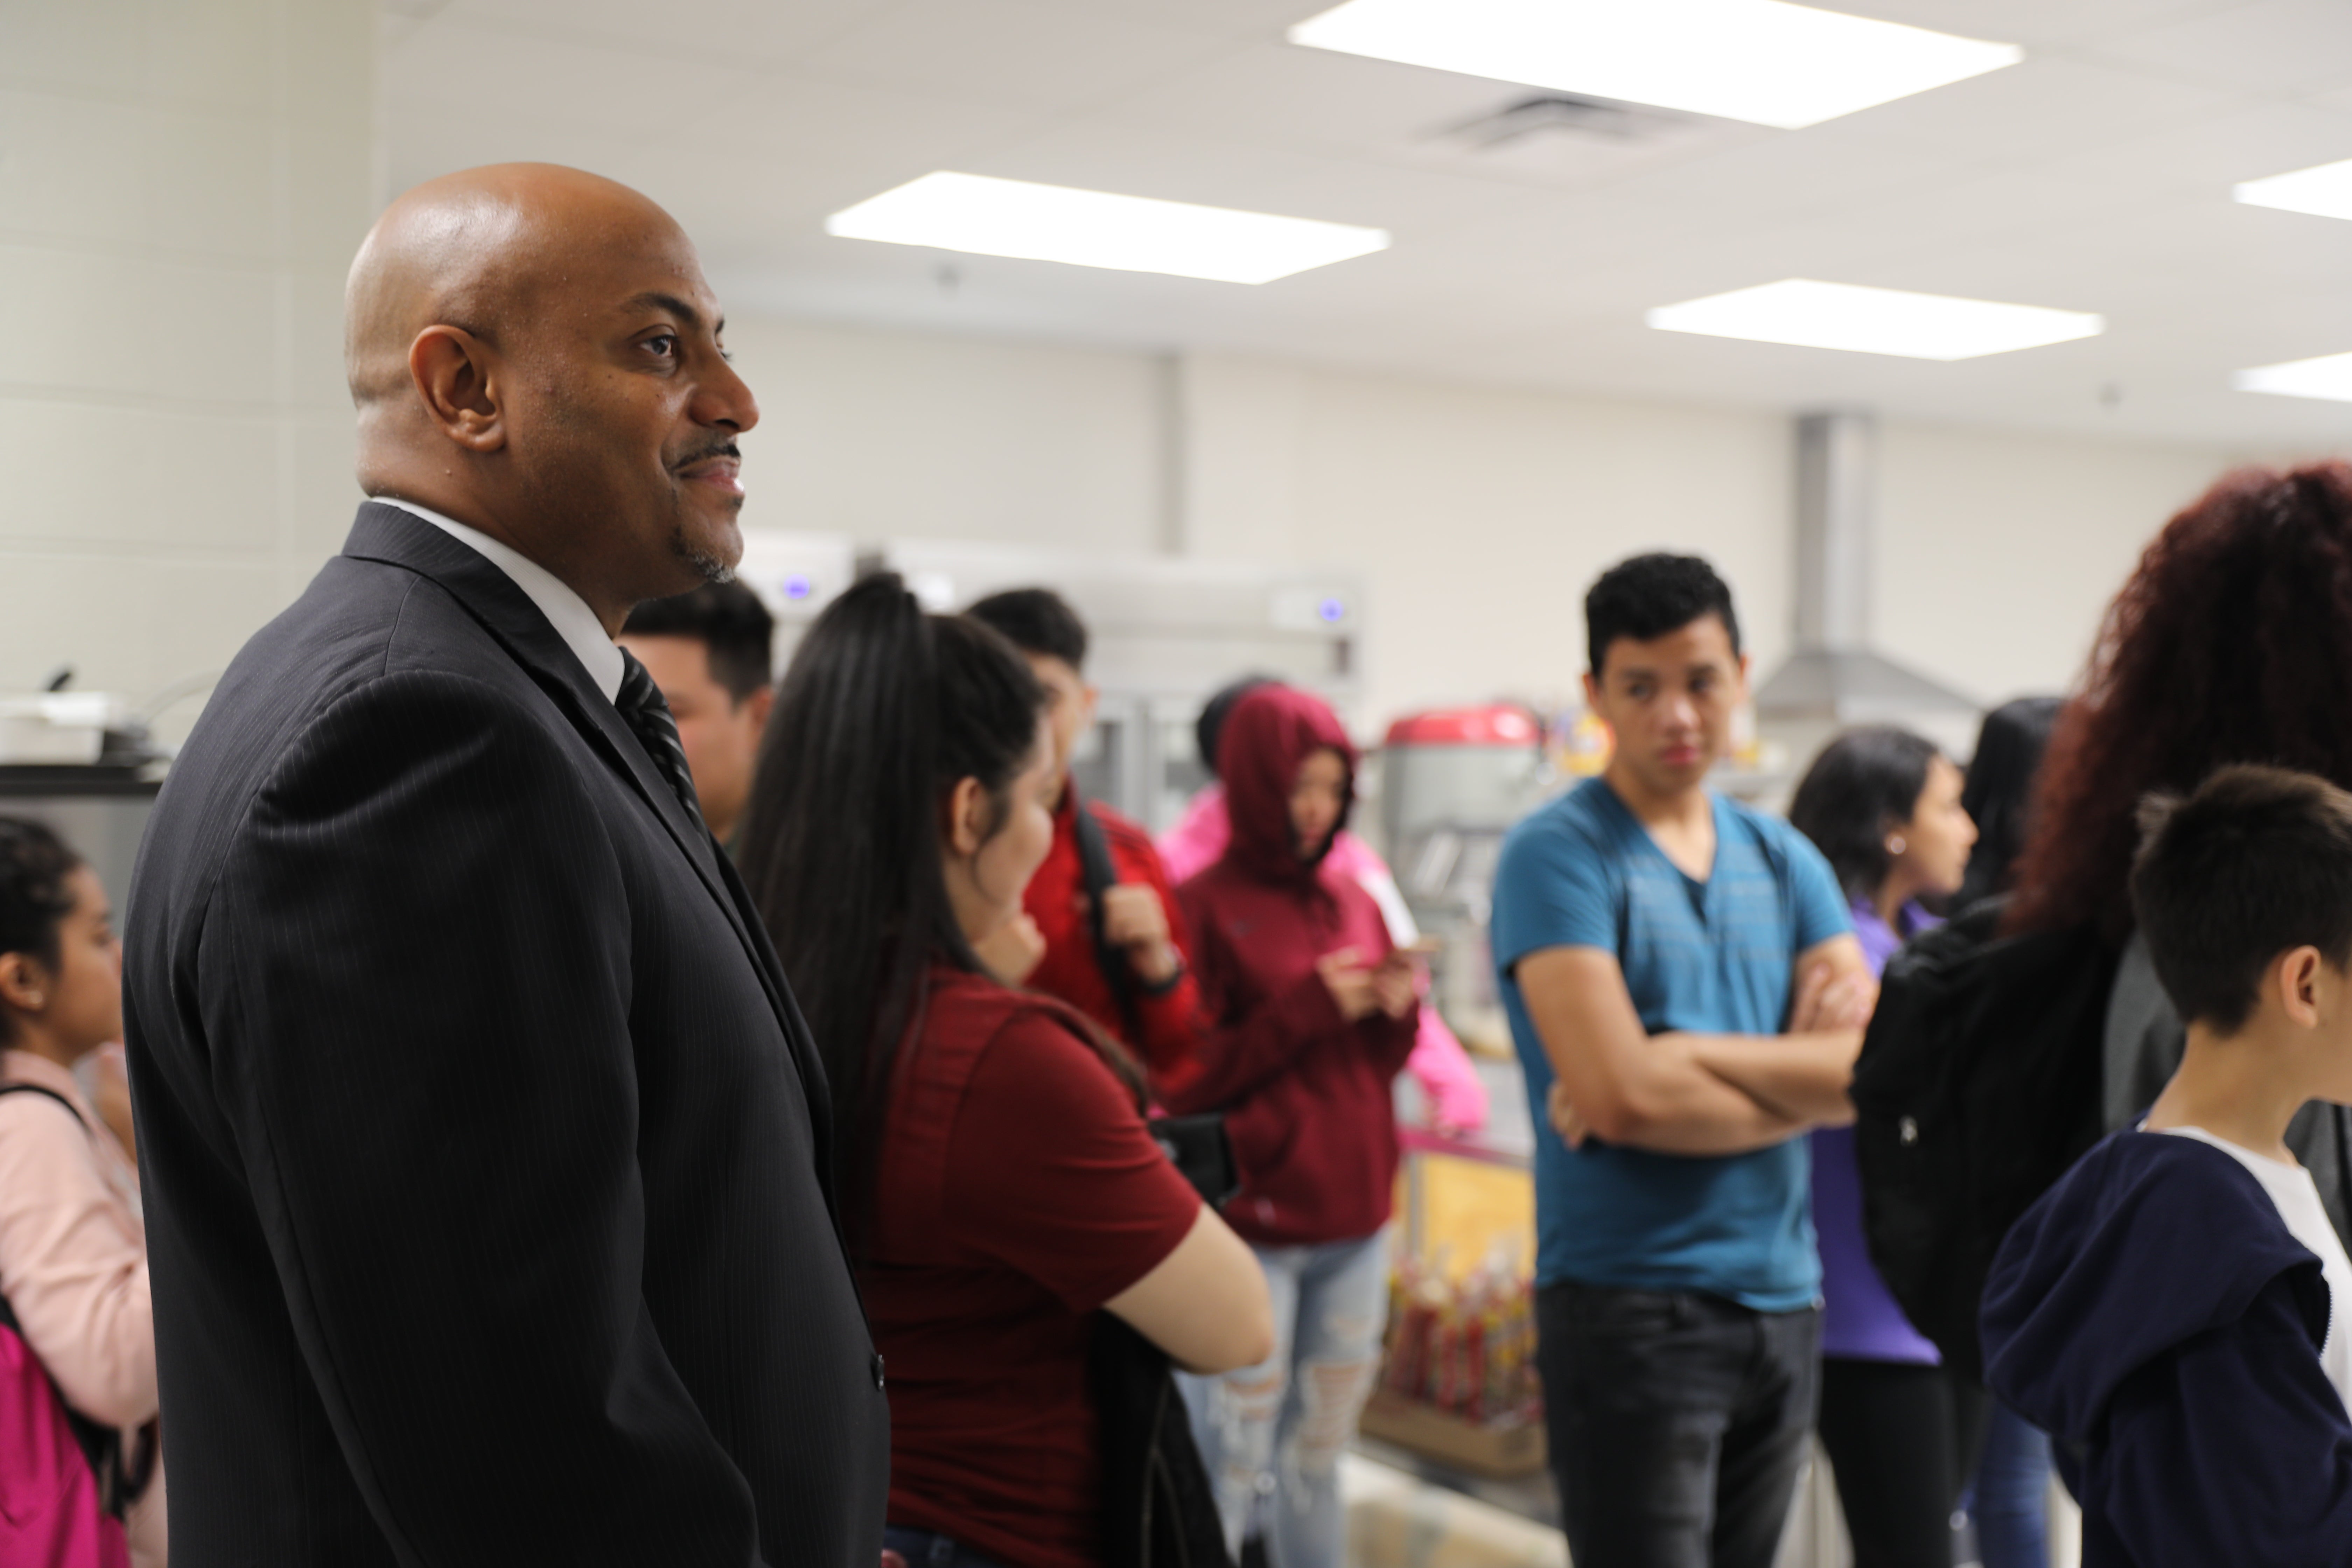 A principal stands among students in a classroom.